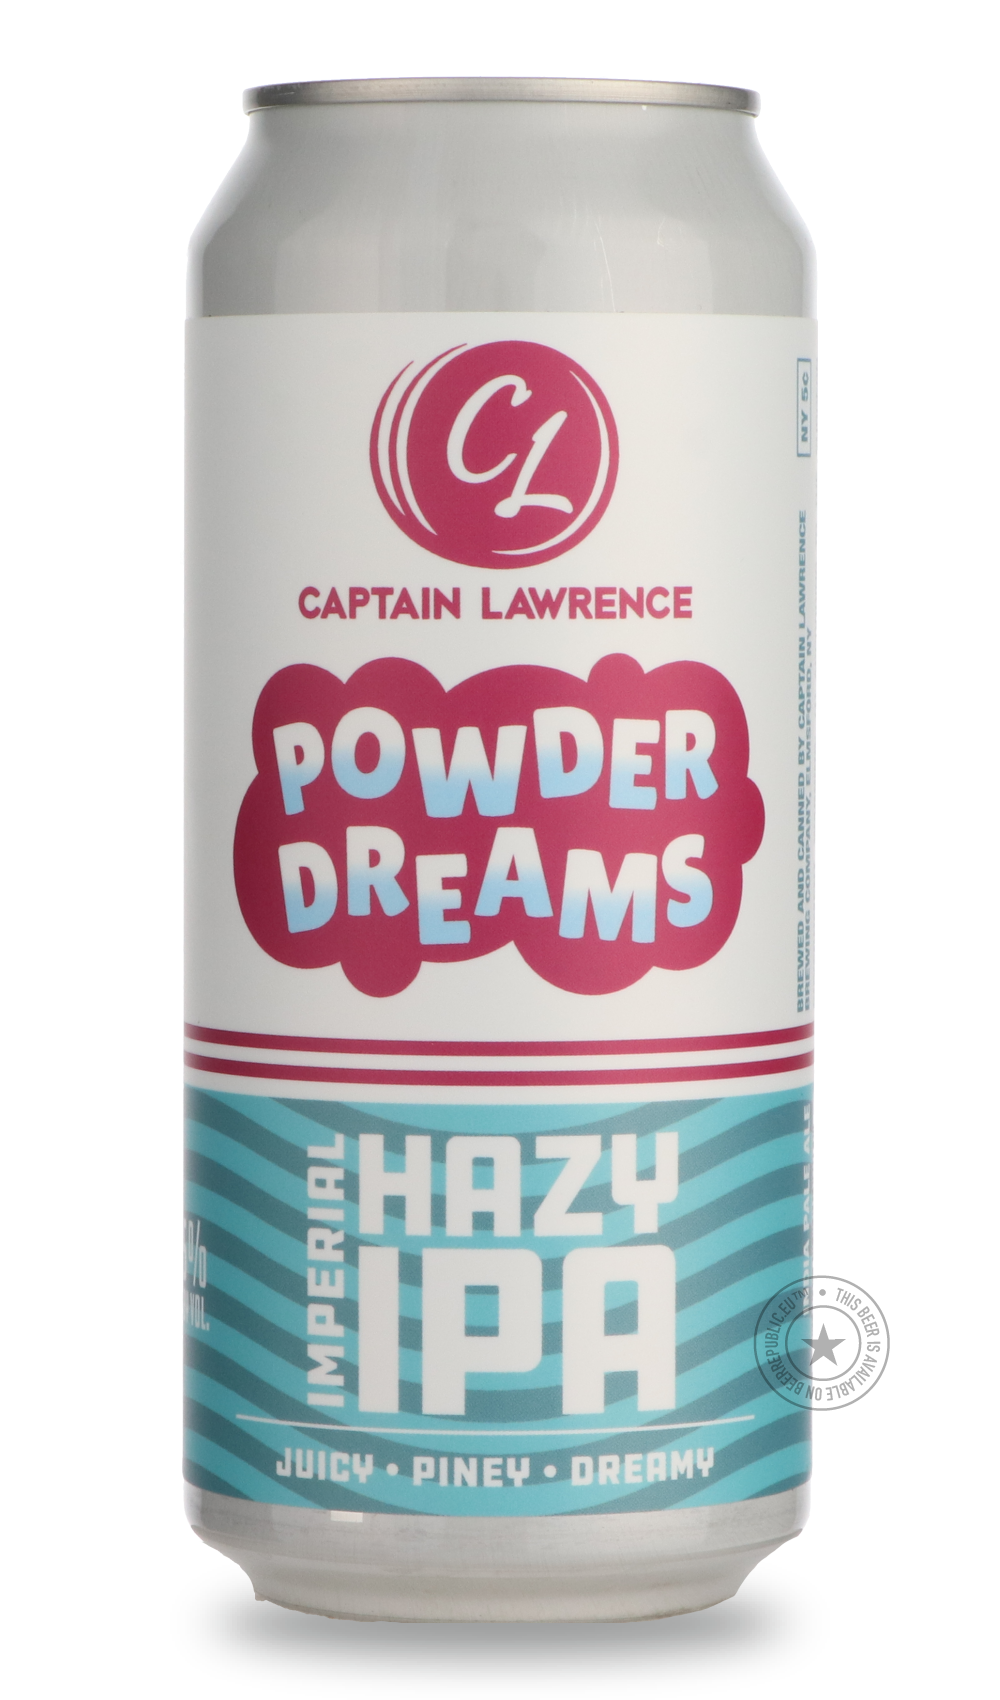 -Captain Lawrence- Powder Dreams-IPA- Only @ Beer Republic - The best online beer store for American & Canadian craft beer - Buy beer online from the USA and Canada - Bier online kopen - Amerikaans bier kopen - Craft beer store - Craft beer kopen - Amerikanisch bier kaufen - Bier online kaufen - Acheter biere online - IPA - Stout - Porter - New England IPA - Hazy IPA - Imperial Stout - Barrel Aged - Barrel Aged Imperial Stout - Brown - Dark beer - Blond - Blonde - Pilsner - Lager - Wheat - Weizen - Amber - 